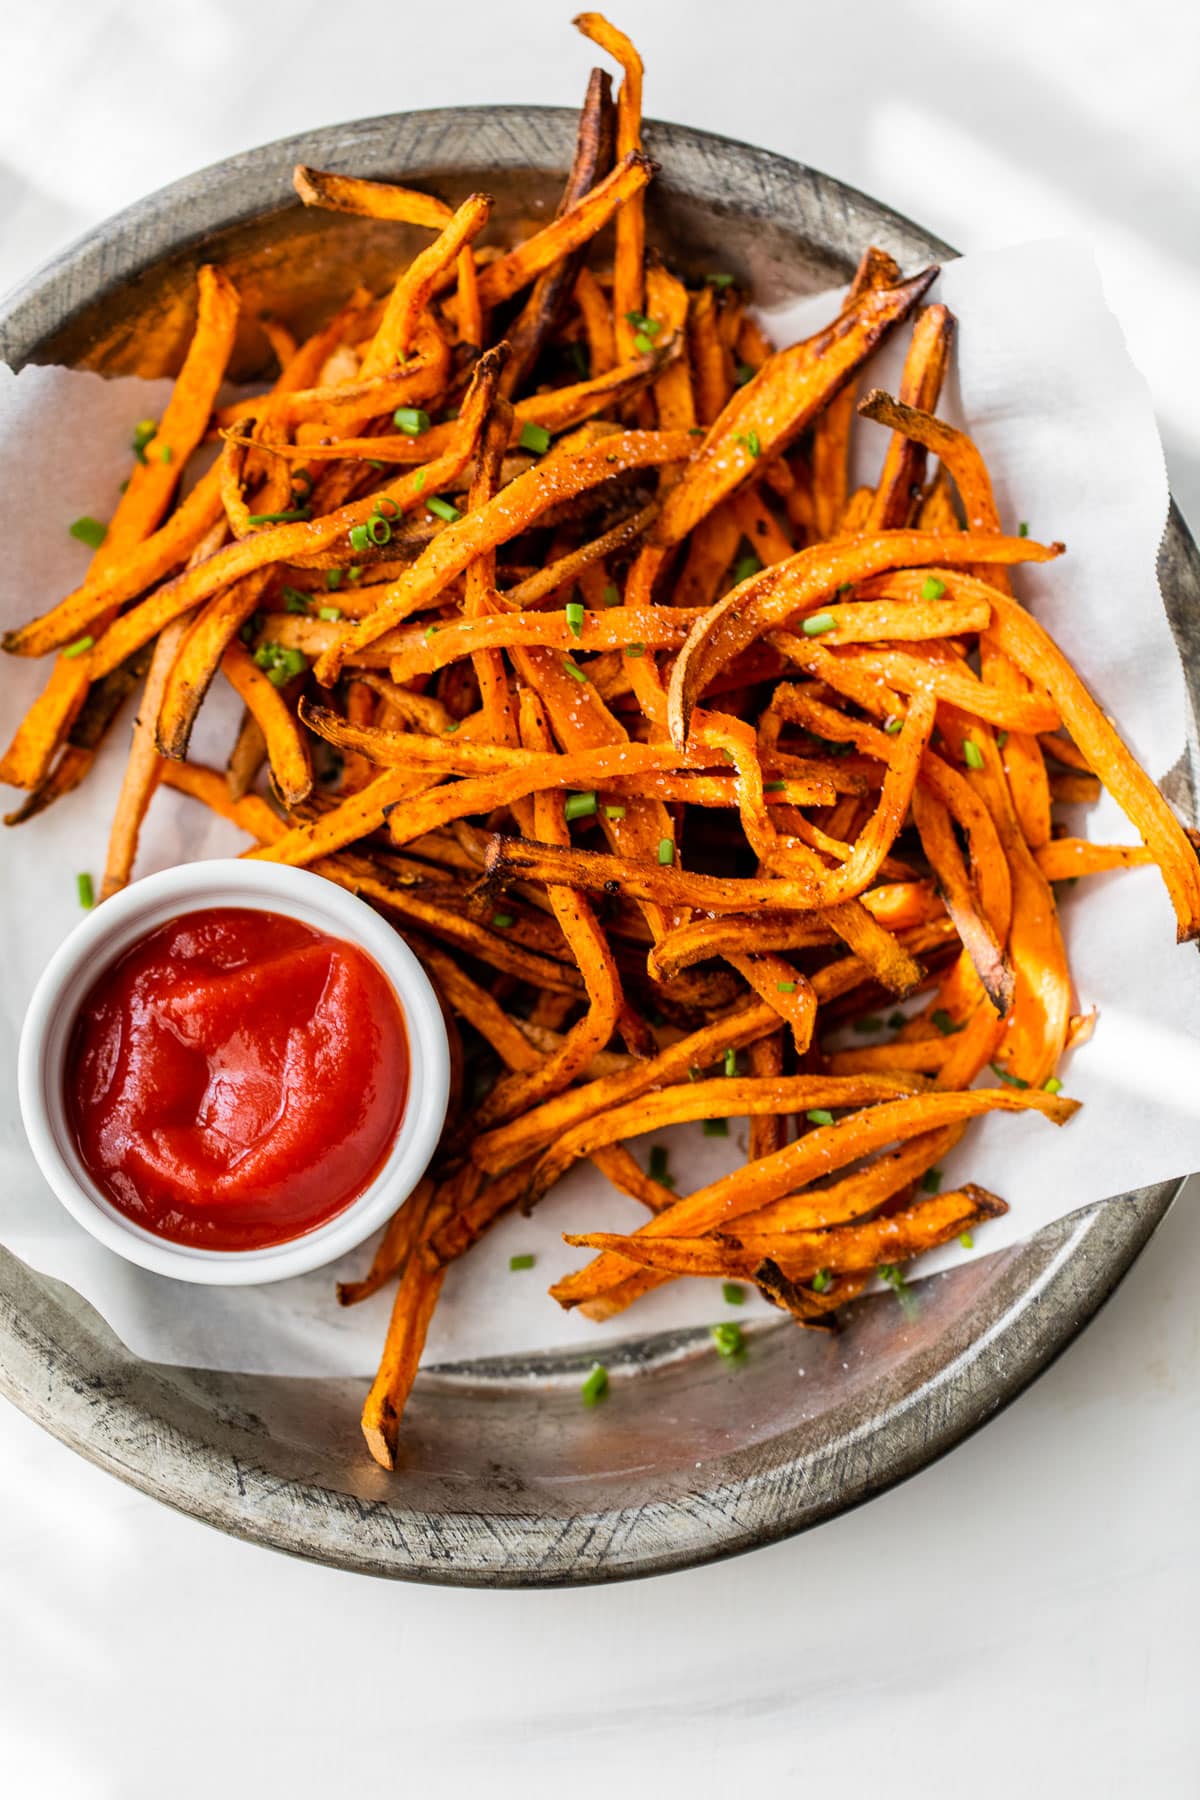 Overhead view of crispy air fryer sweet potato fries on plate with ketchup